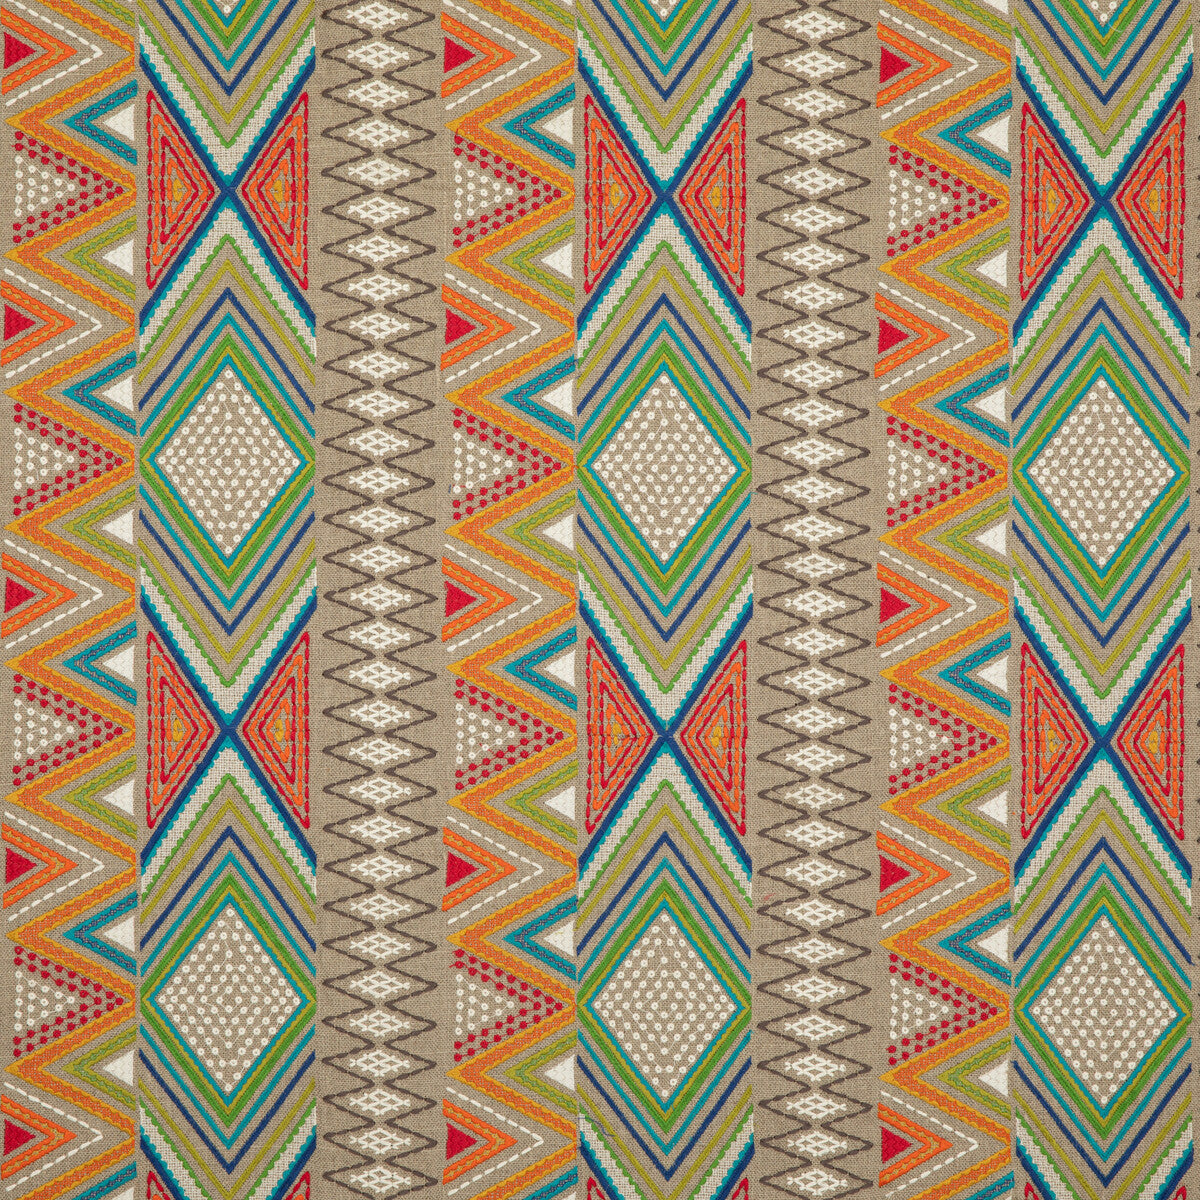 Fiesta fabric in multi color - pattern PF50467.1.0 - by Baker Lifestyle in the Fiesta collection